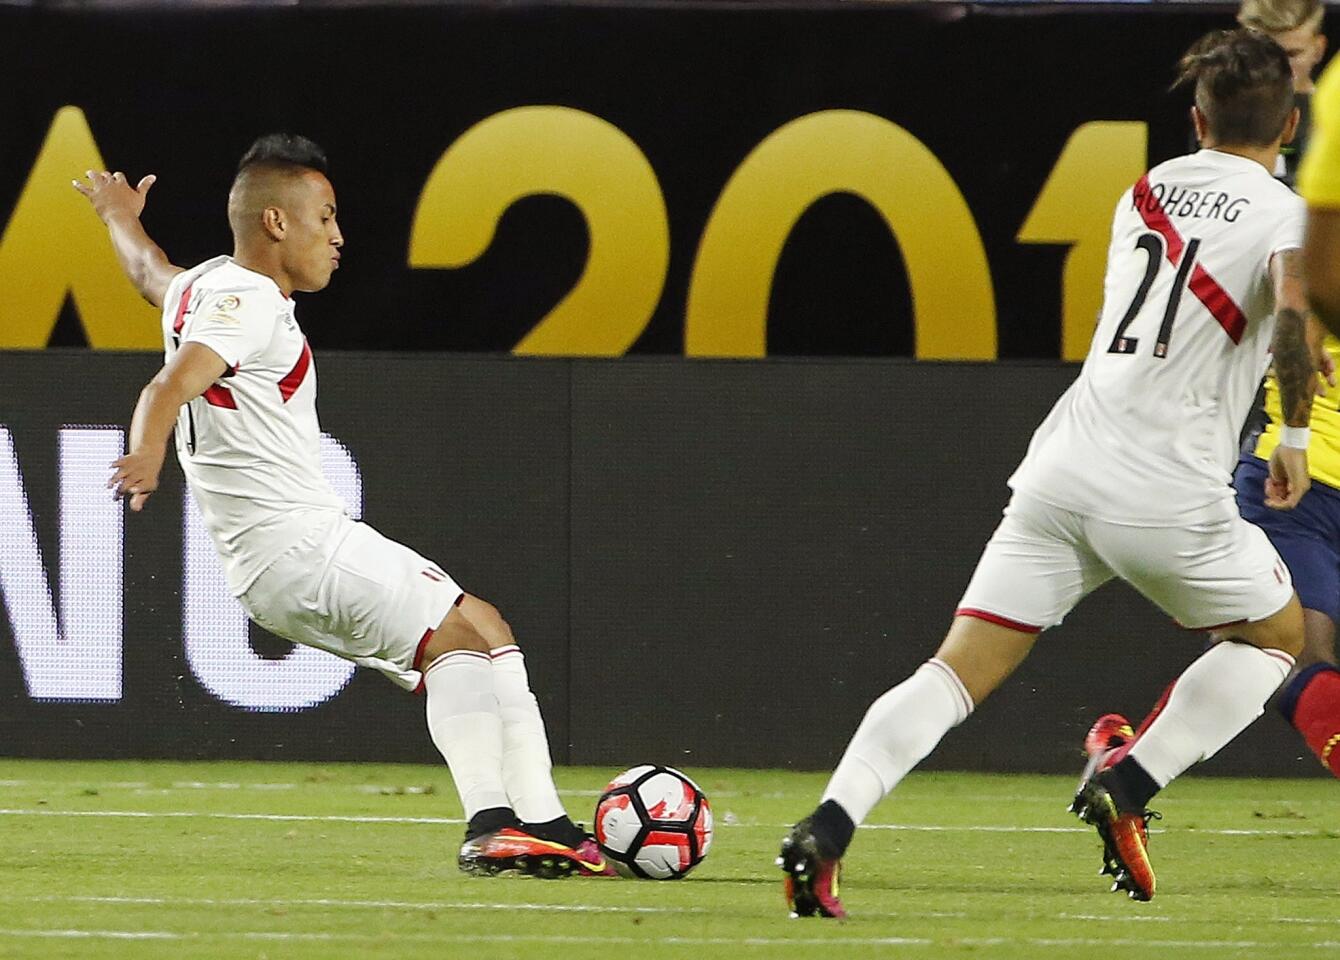 Peru's Christian Cueva, left, kicks the ball for a goal as teammate Alejandro Hohberg (21) watches during the first half of a Copa America group C soccer match against Ecuador on Wednesday, June 8, 2016, in Glendale, Ariz. (AP Photo/Ross D. Franklin)